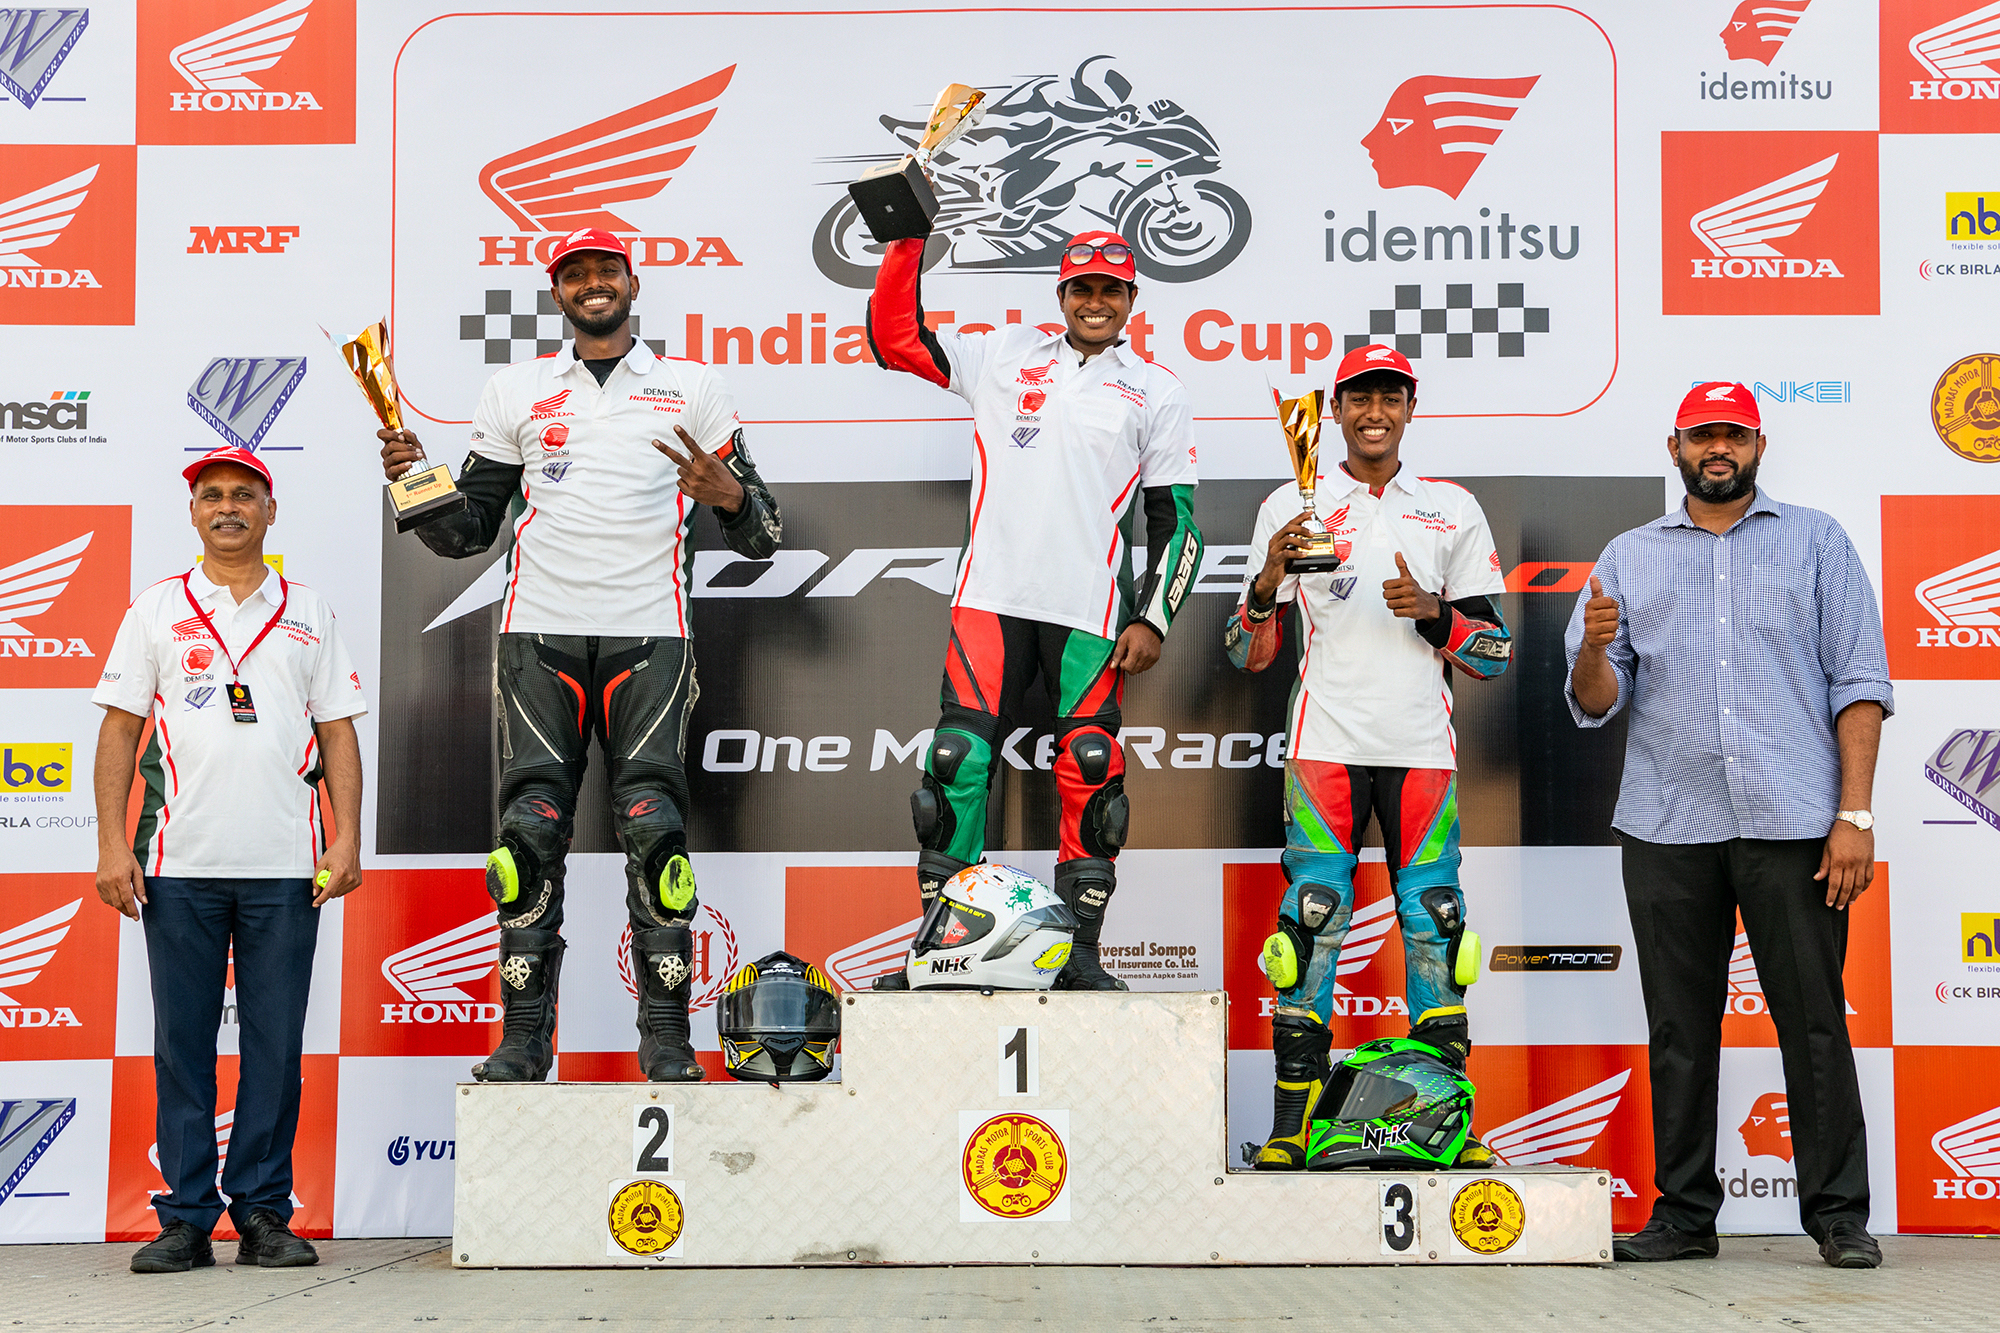 young-talent-steals-the-show-at-round-1-of-idemitsu-honda-india-talent-cup